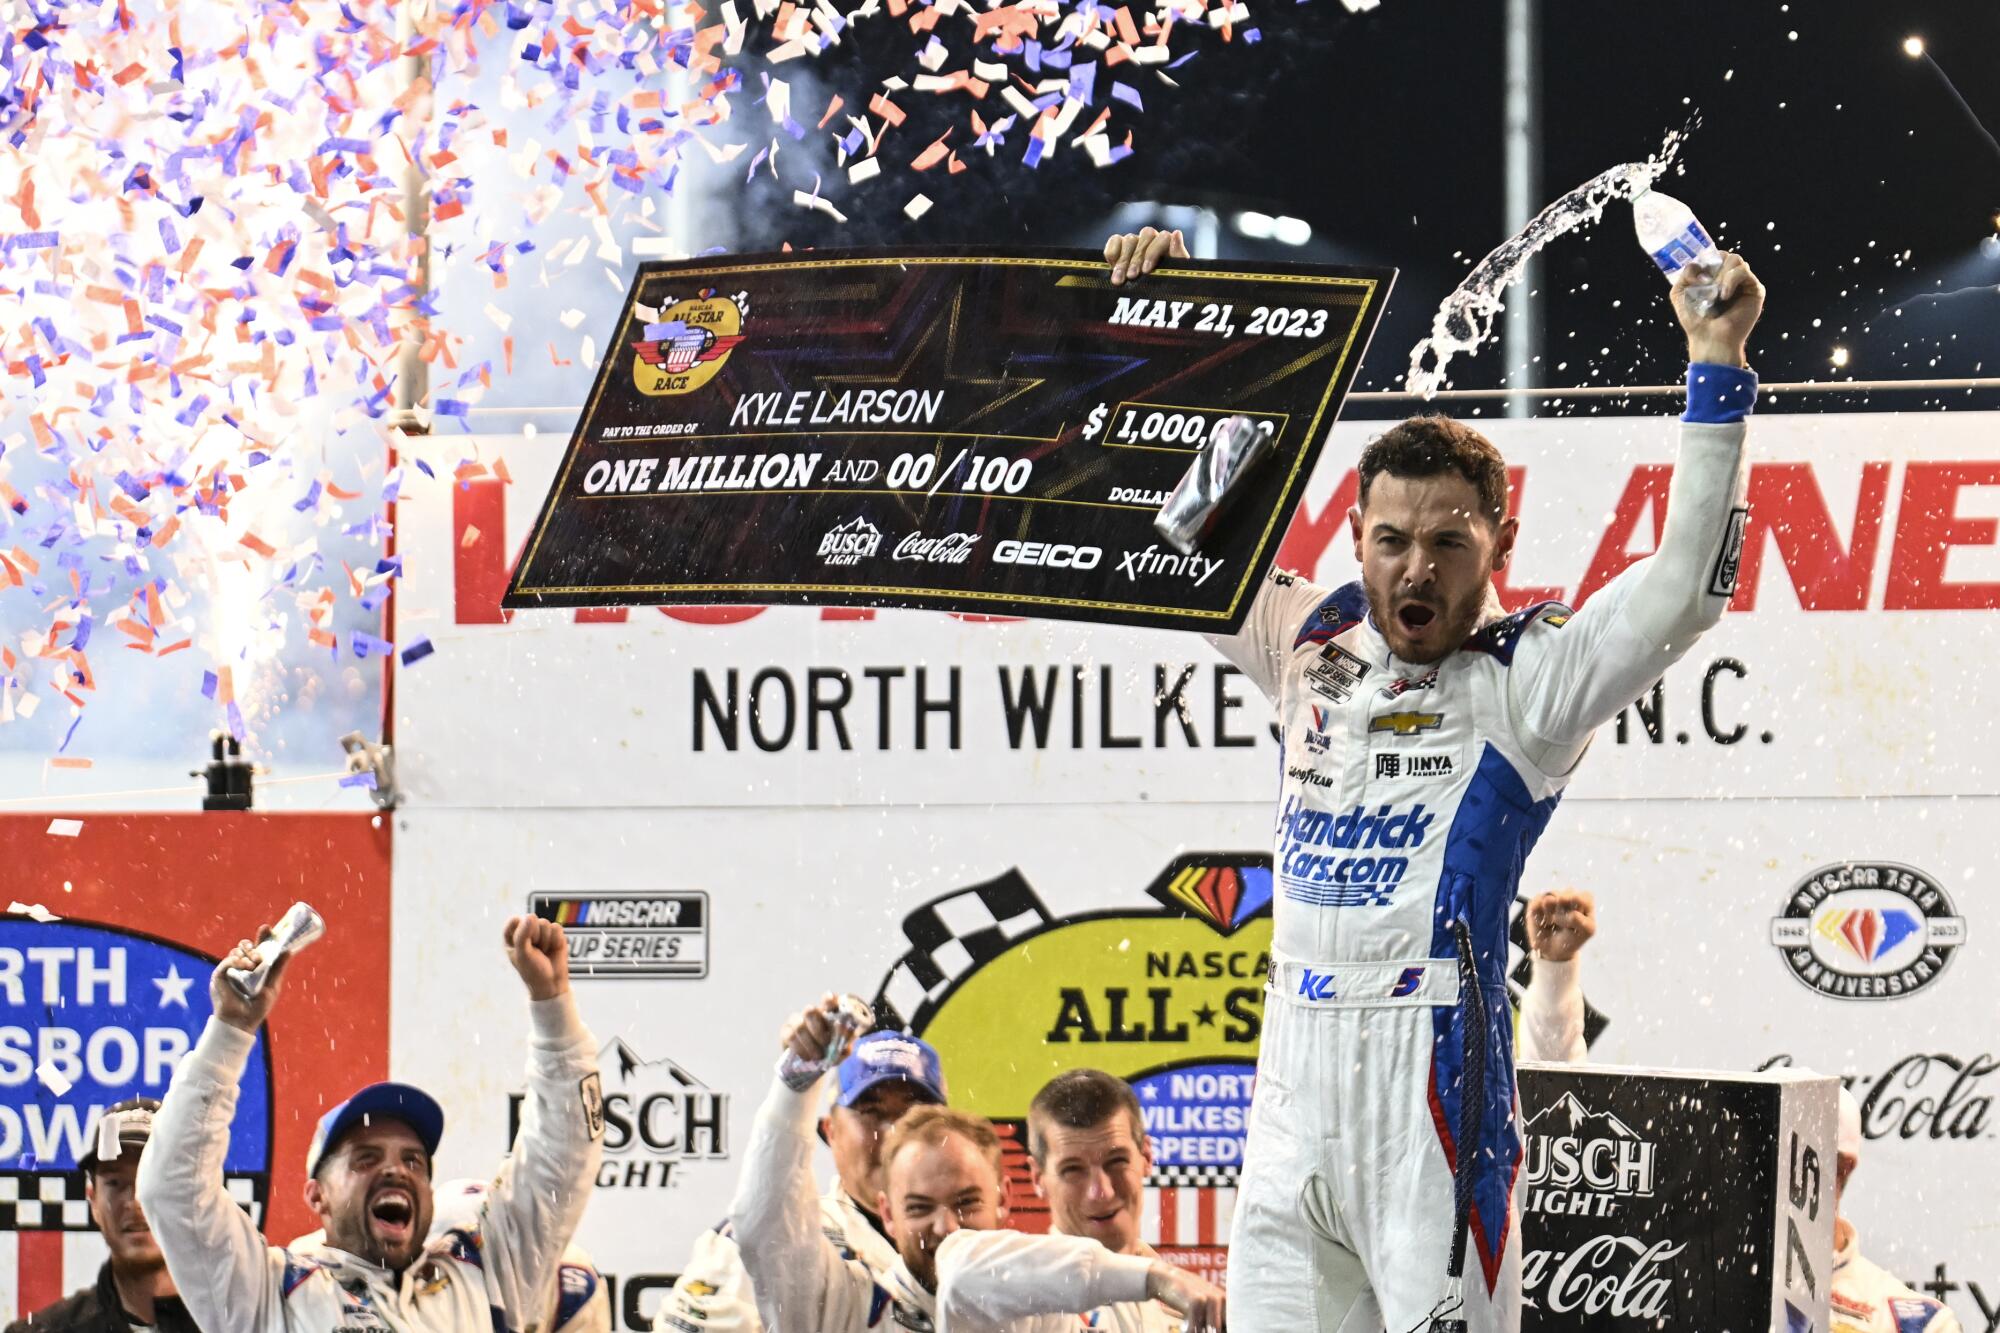 NASCAR driver Kyle Larson celebrates in Victory Lane after winning the All-Star Cup race at North Wilkesboro Speedway.